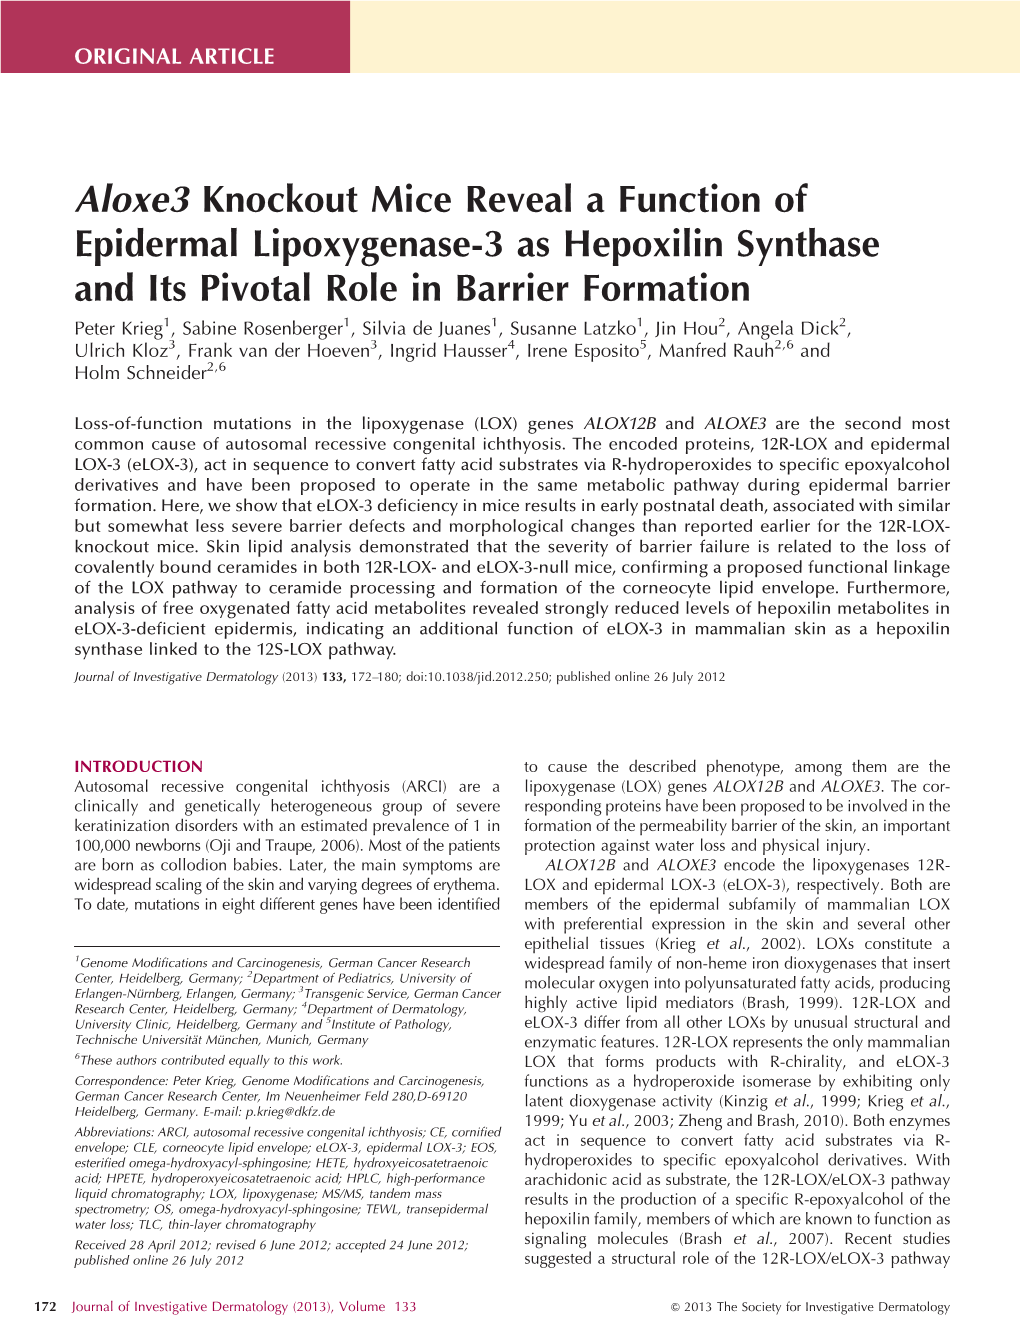 Aloxe3 Knockout Mice Reveal a Function of Epidermal Lipoxygenase-3 As Hepoxilin Synthase and Its Pivotal Role in Barrier Formati